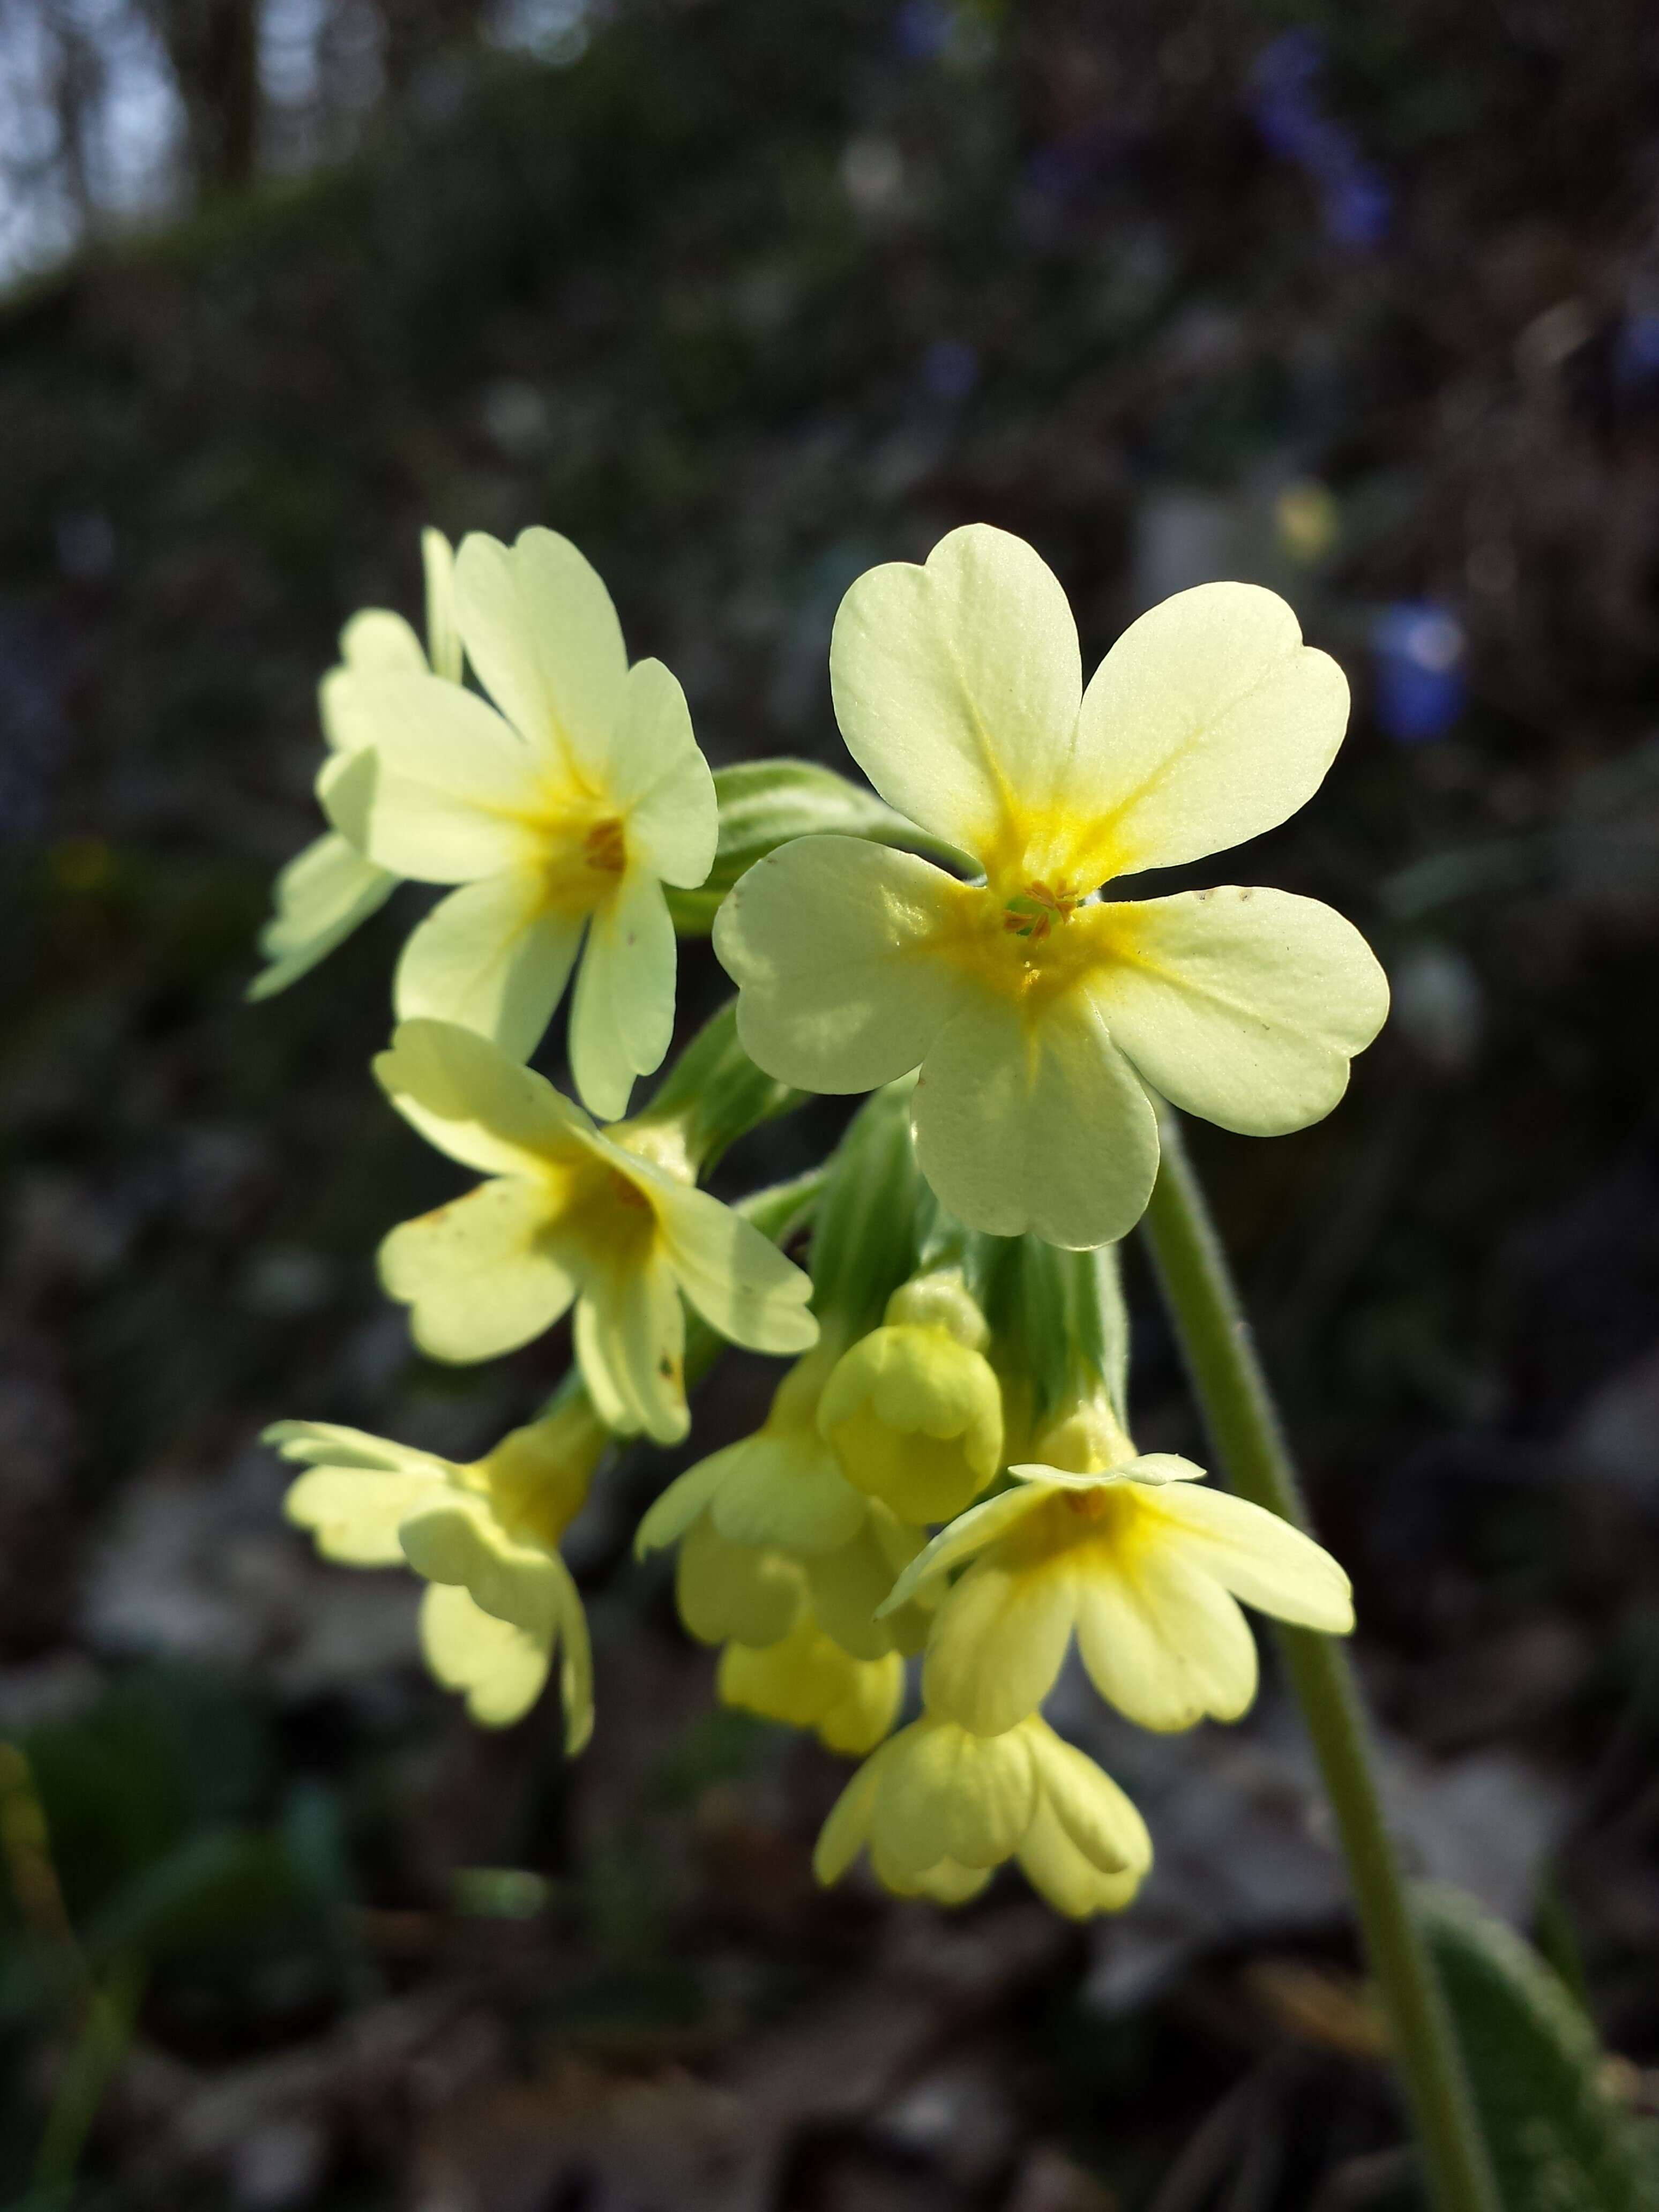 Image of oxlip